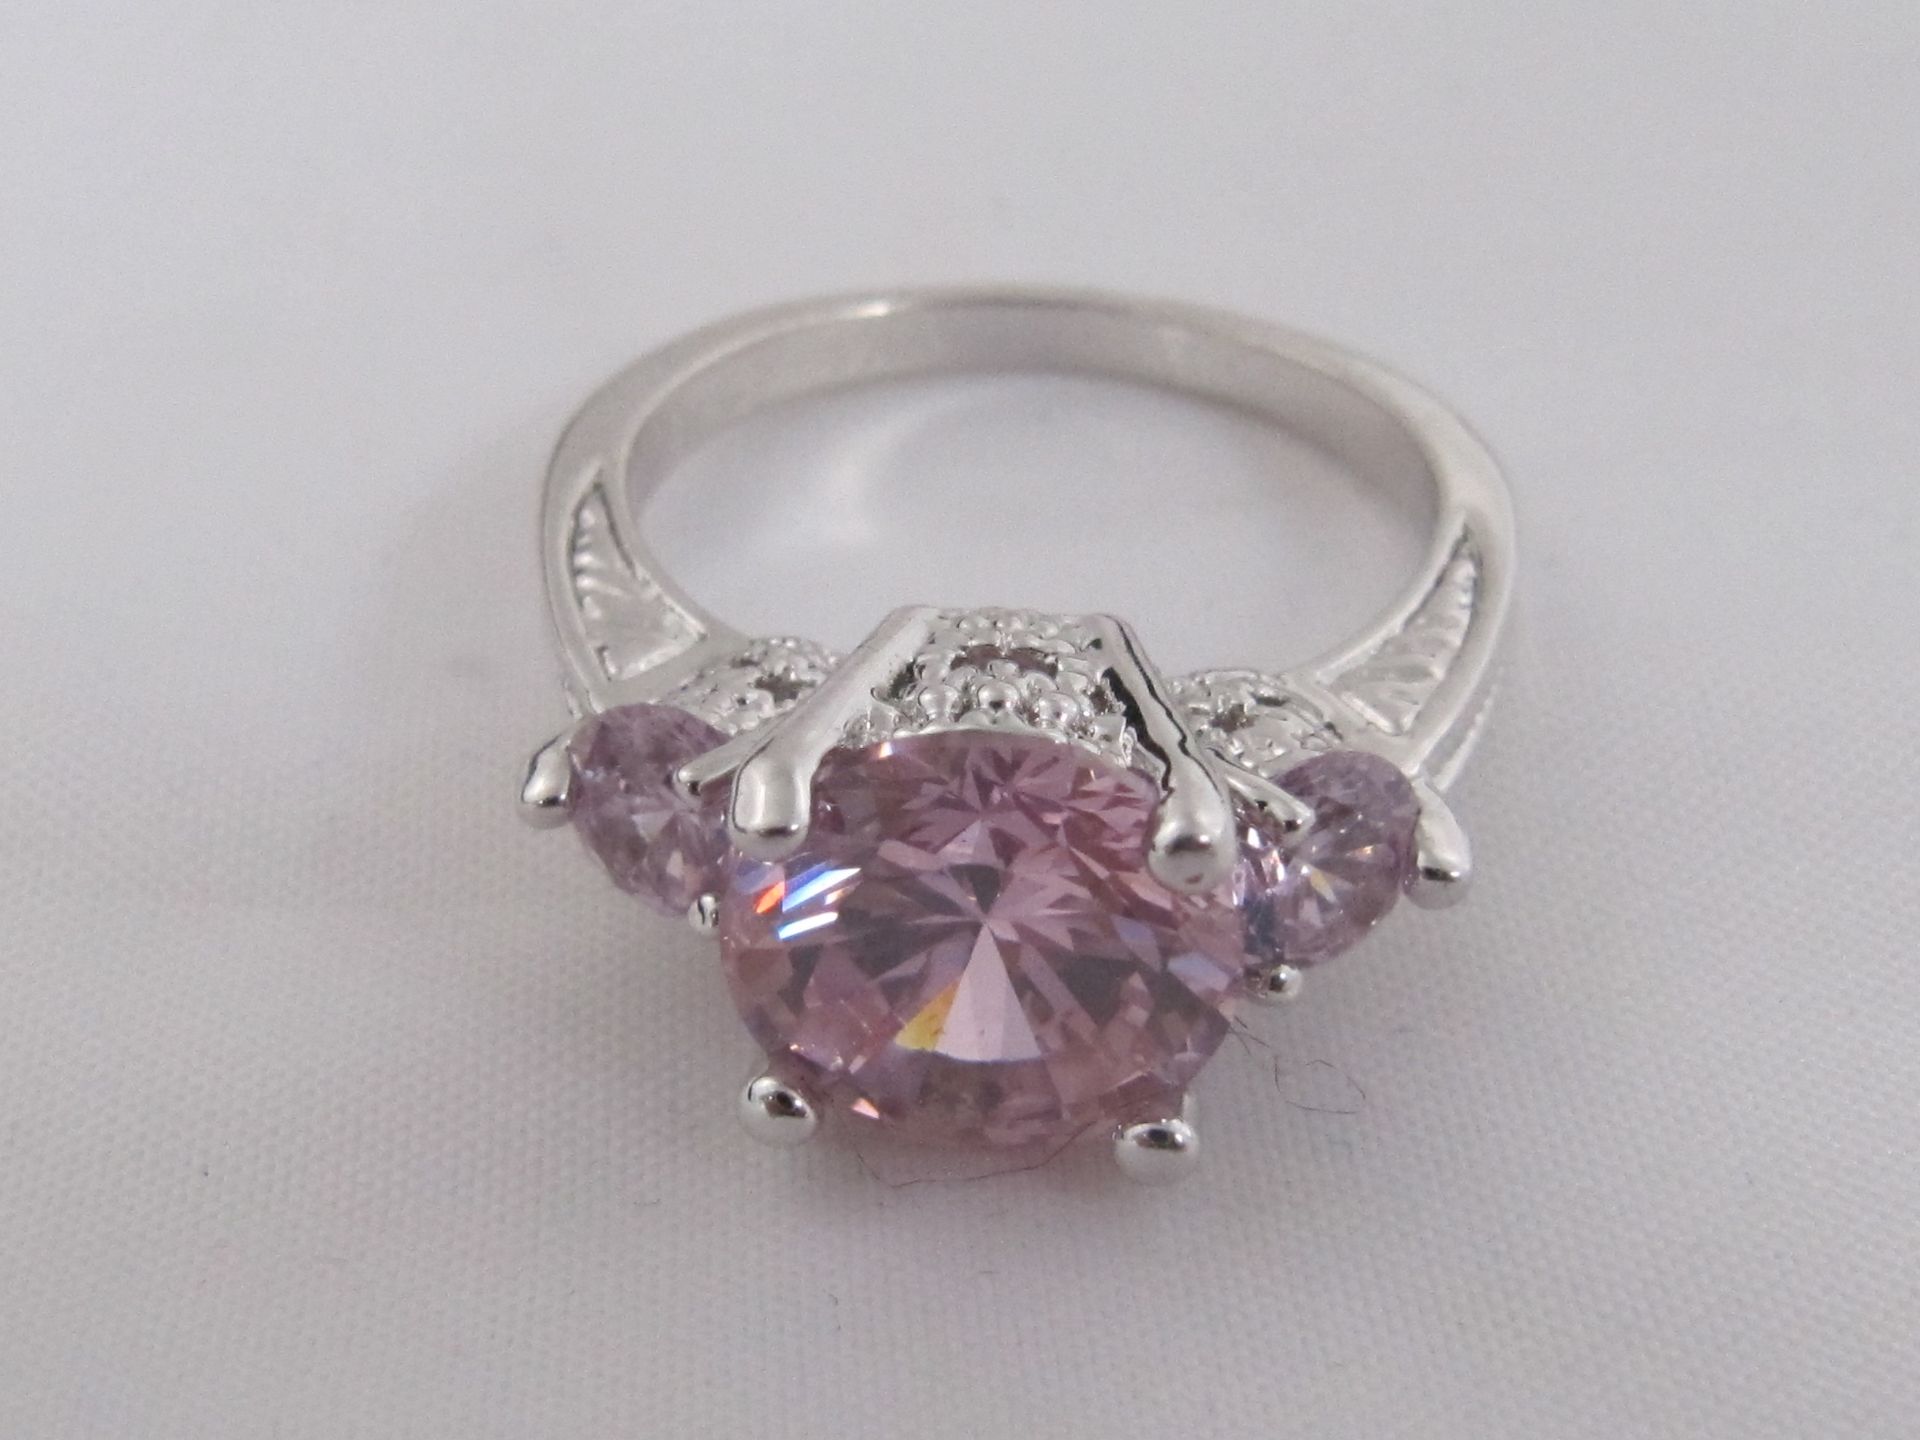 10k White Gold Filled with Pink Sapphires. Size R. - Image 5 of 5